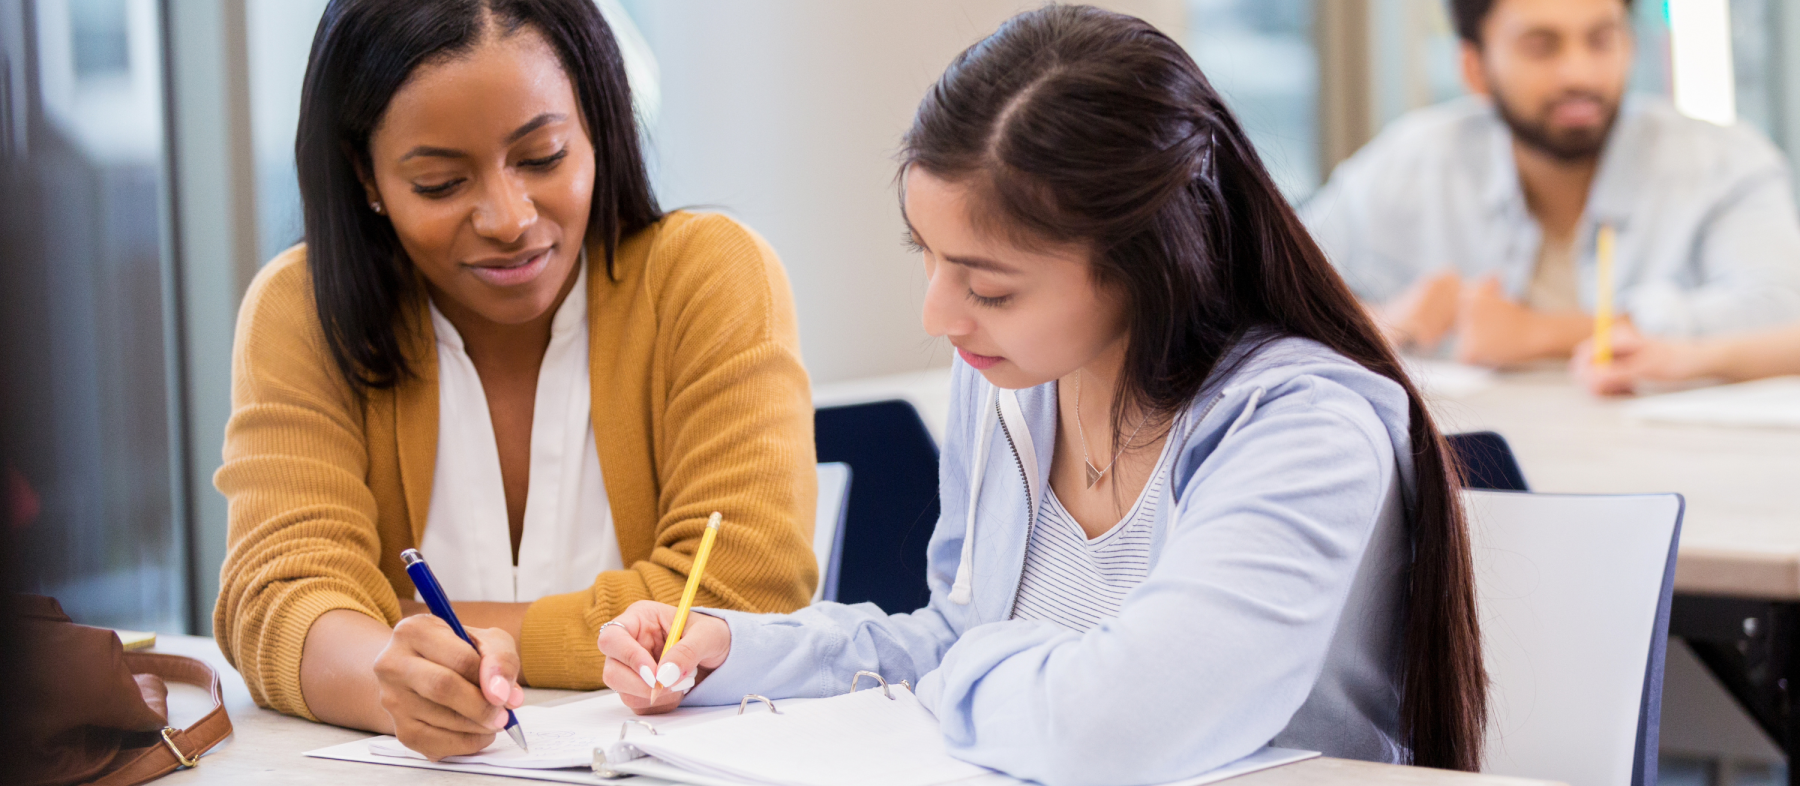 An advisor works with a high school student on some documents